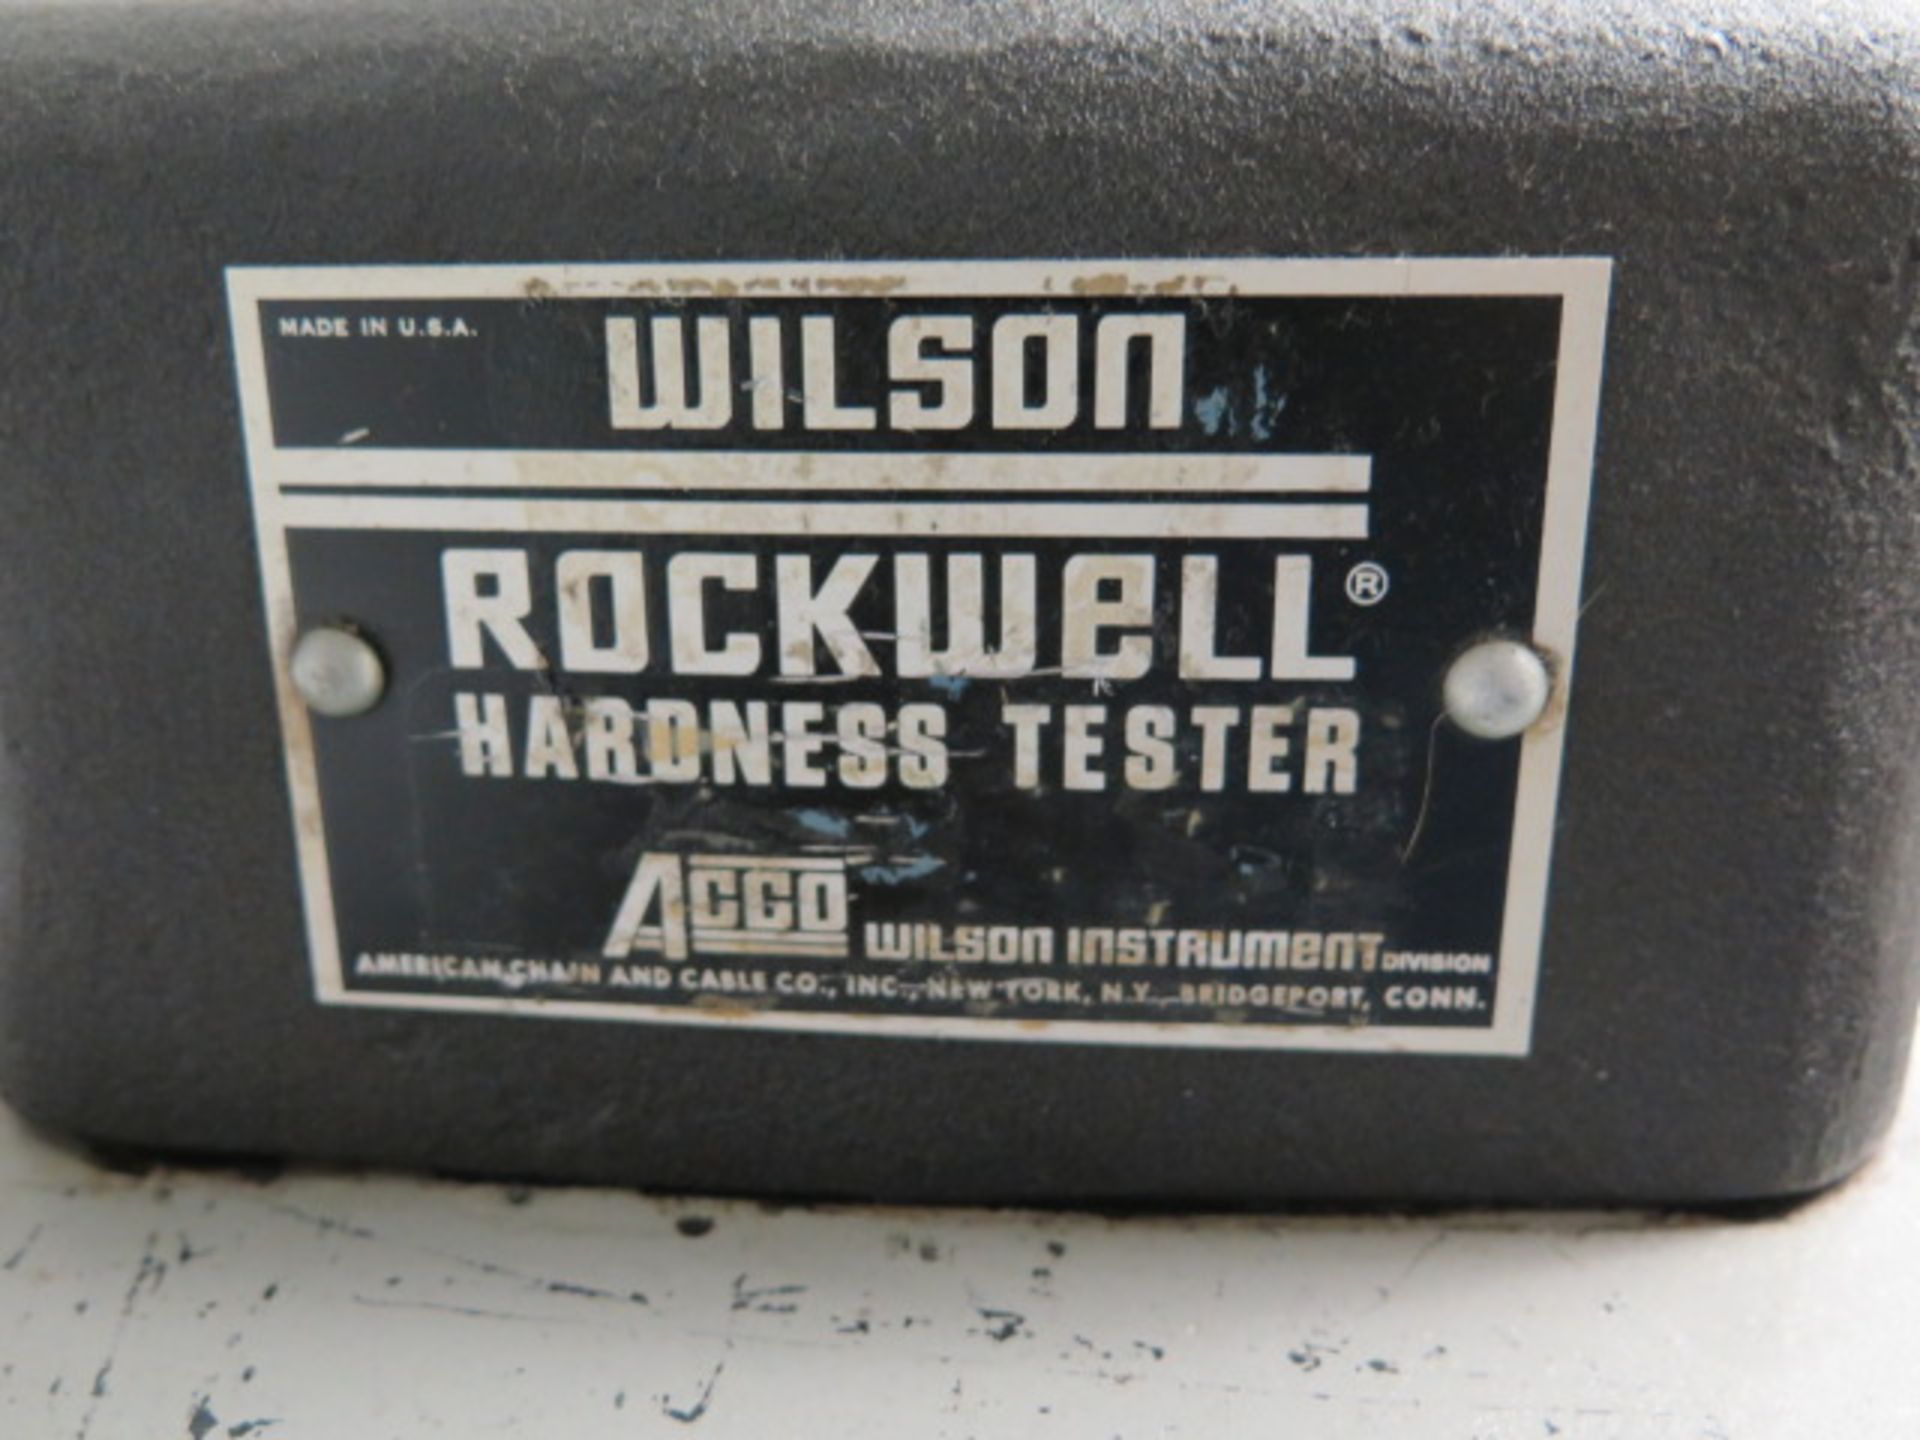 Wilson mdl. 3OUR Rockwell Hardness Tester s/n 702 - Image 3 of 3